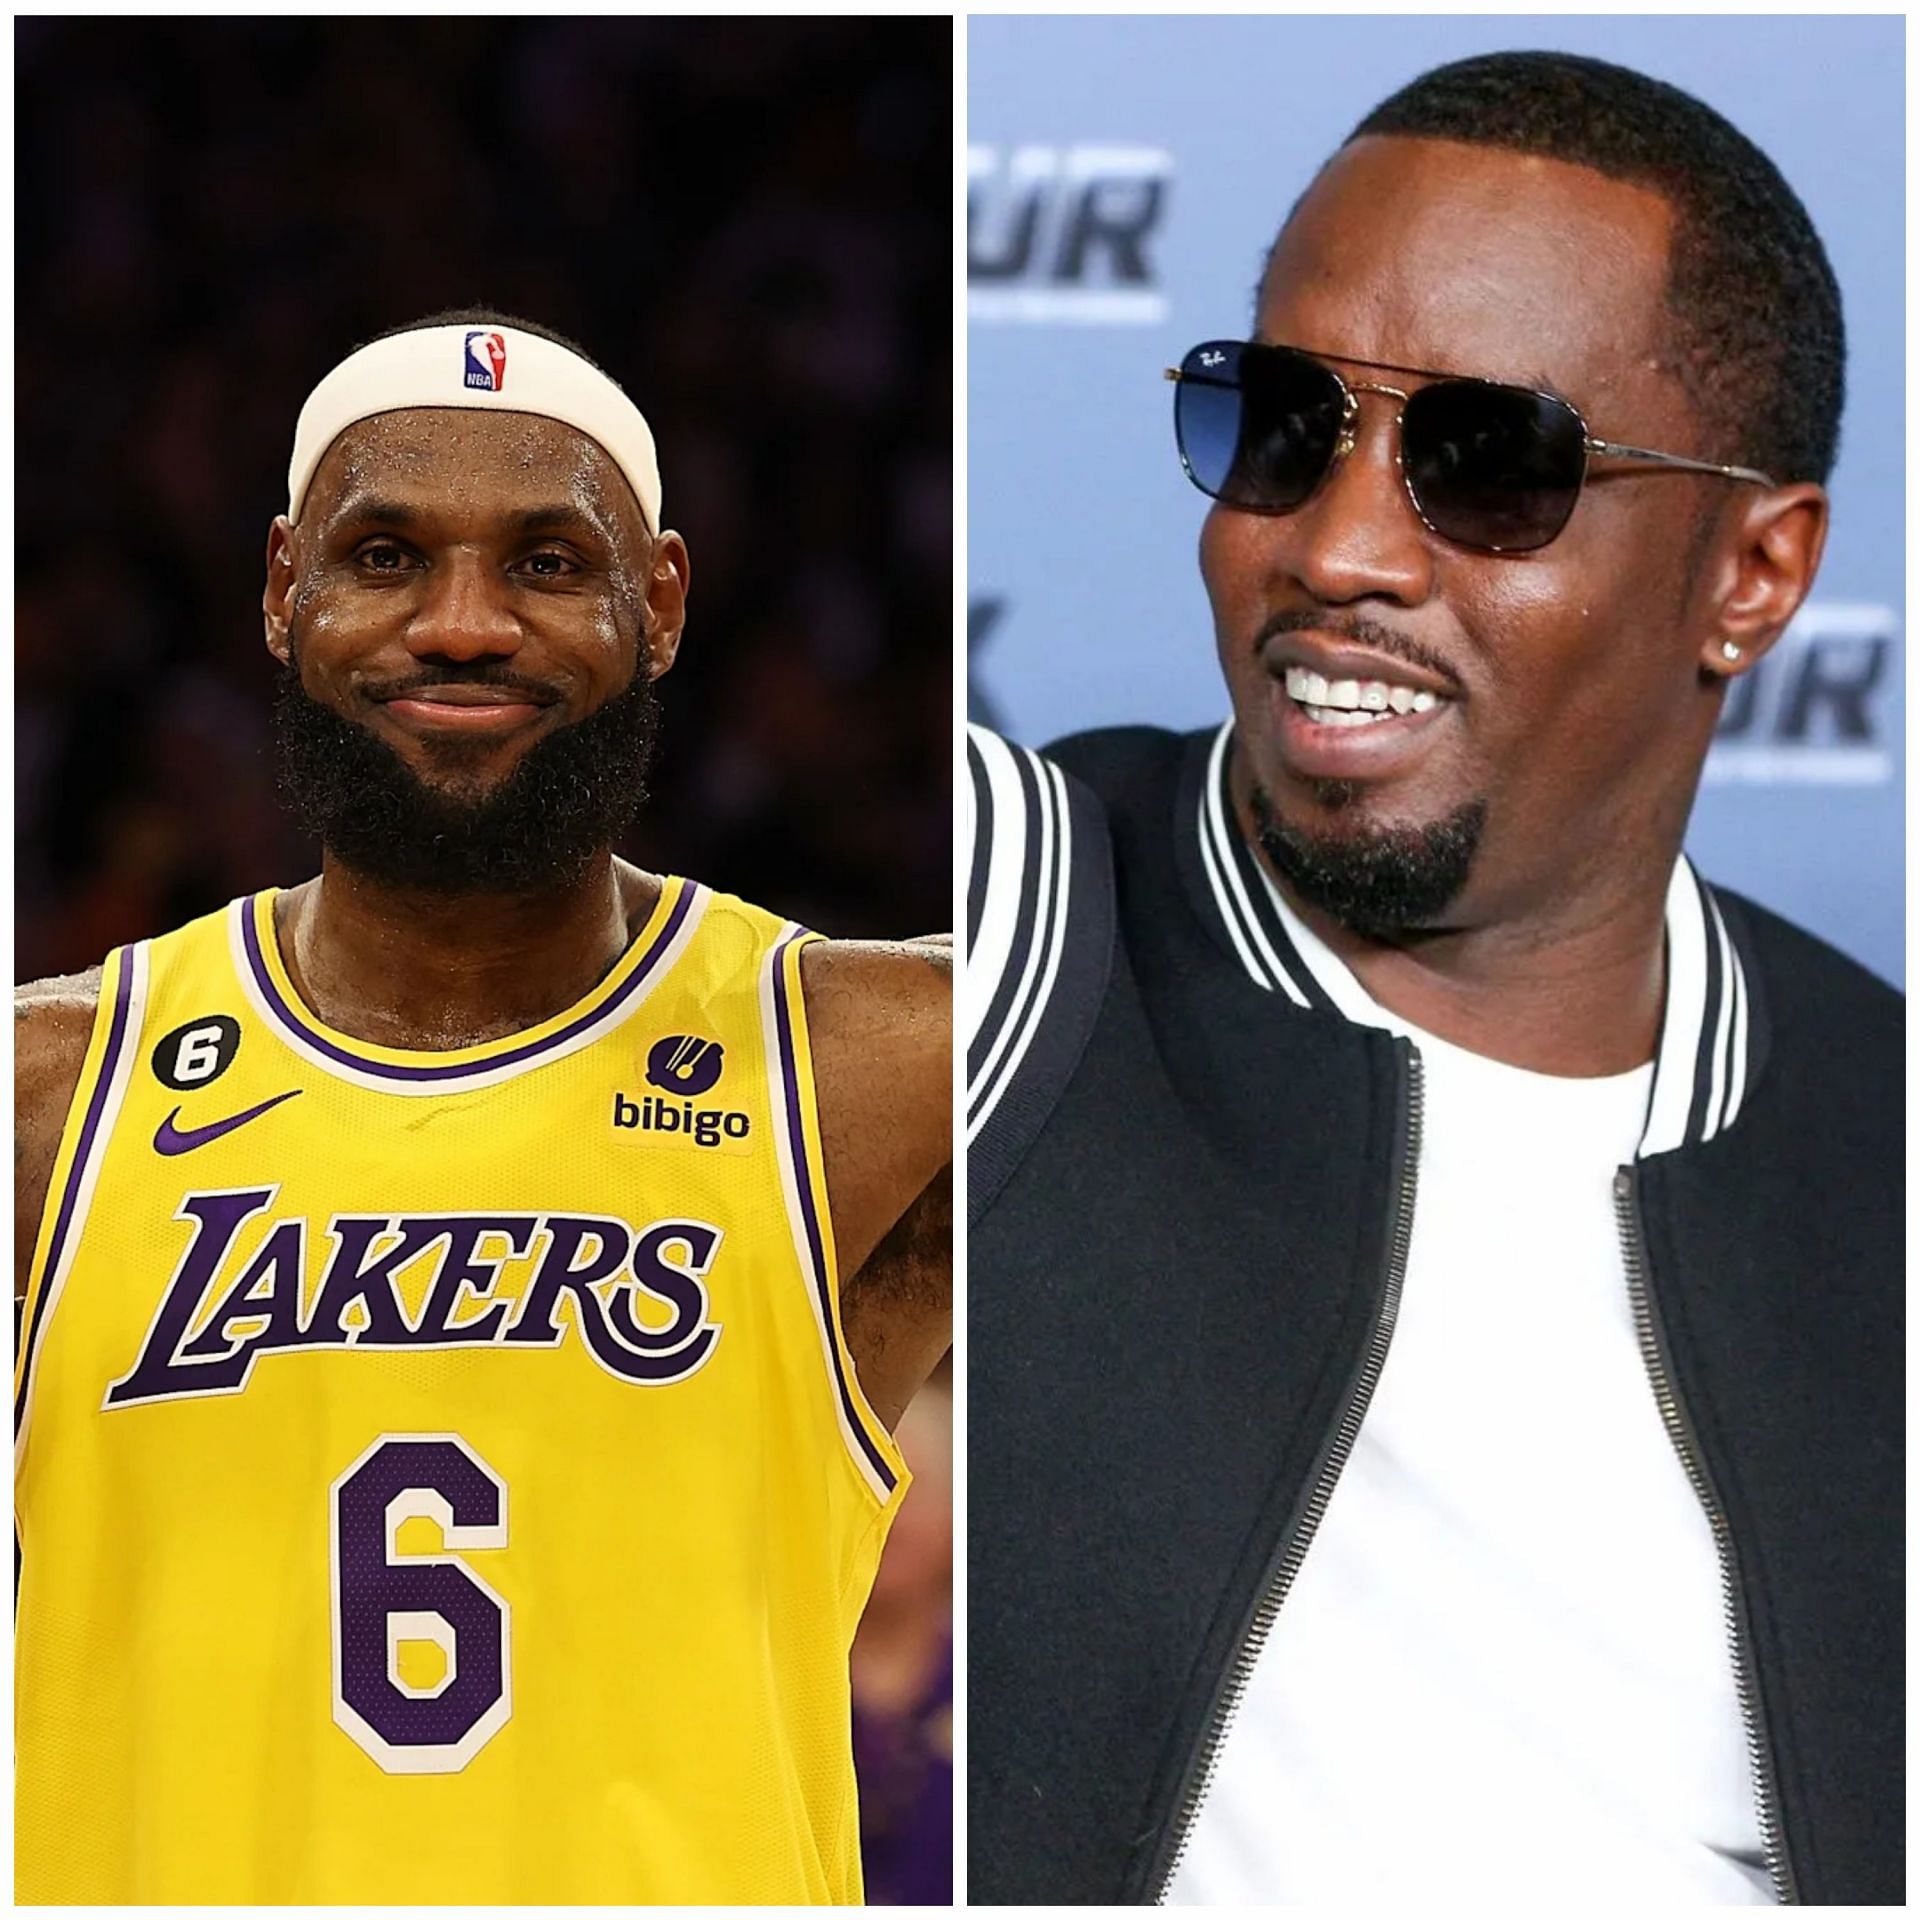 LeBron James confirms to 3-time Grammy winner Diddy that he